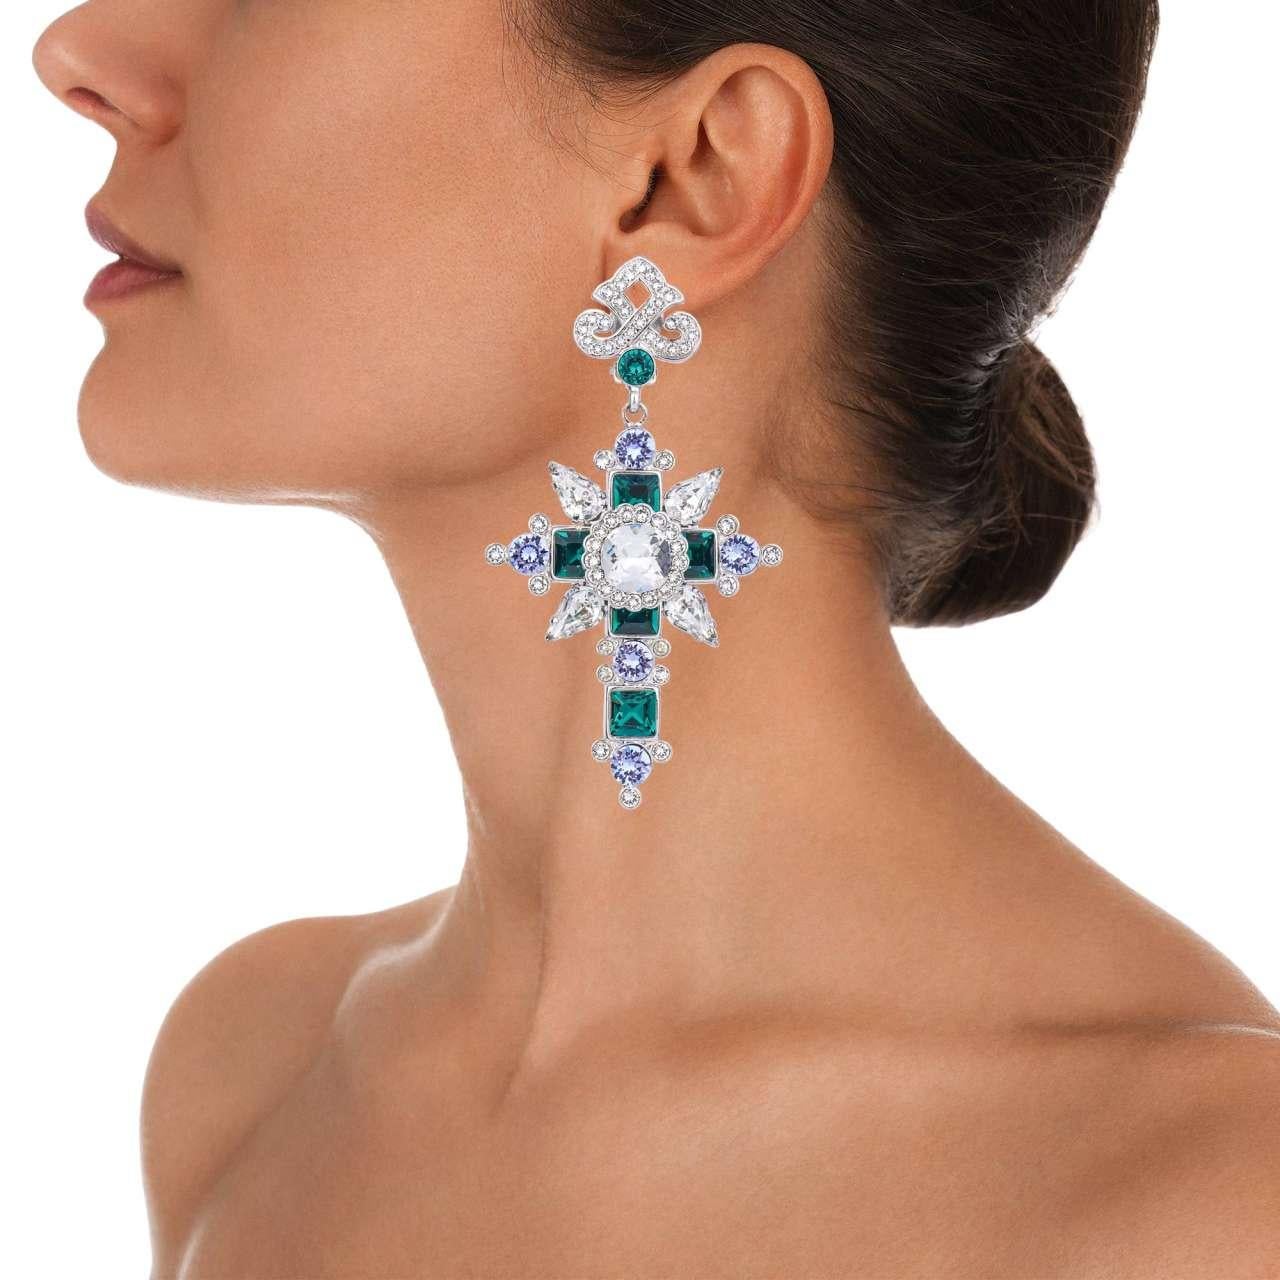 - Cross Clip Earrings with crystals in white, green purple and silver by DOLCE & GABBANA - RUNWAY - Dolce & Gabbana Fashion Show - New with Box - Made in Italy - Silver brass - Clip fastening - Nickel free - Model: WEL2N8-W1111-87655 - Material: 50%